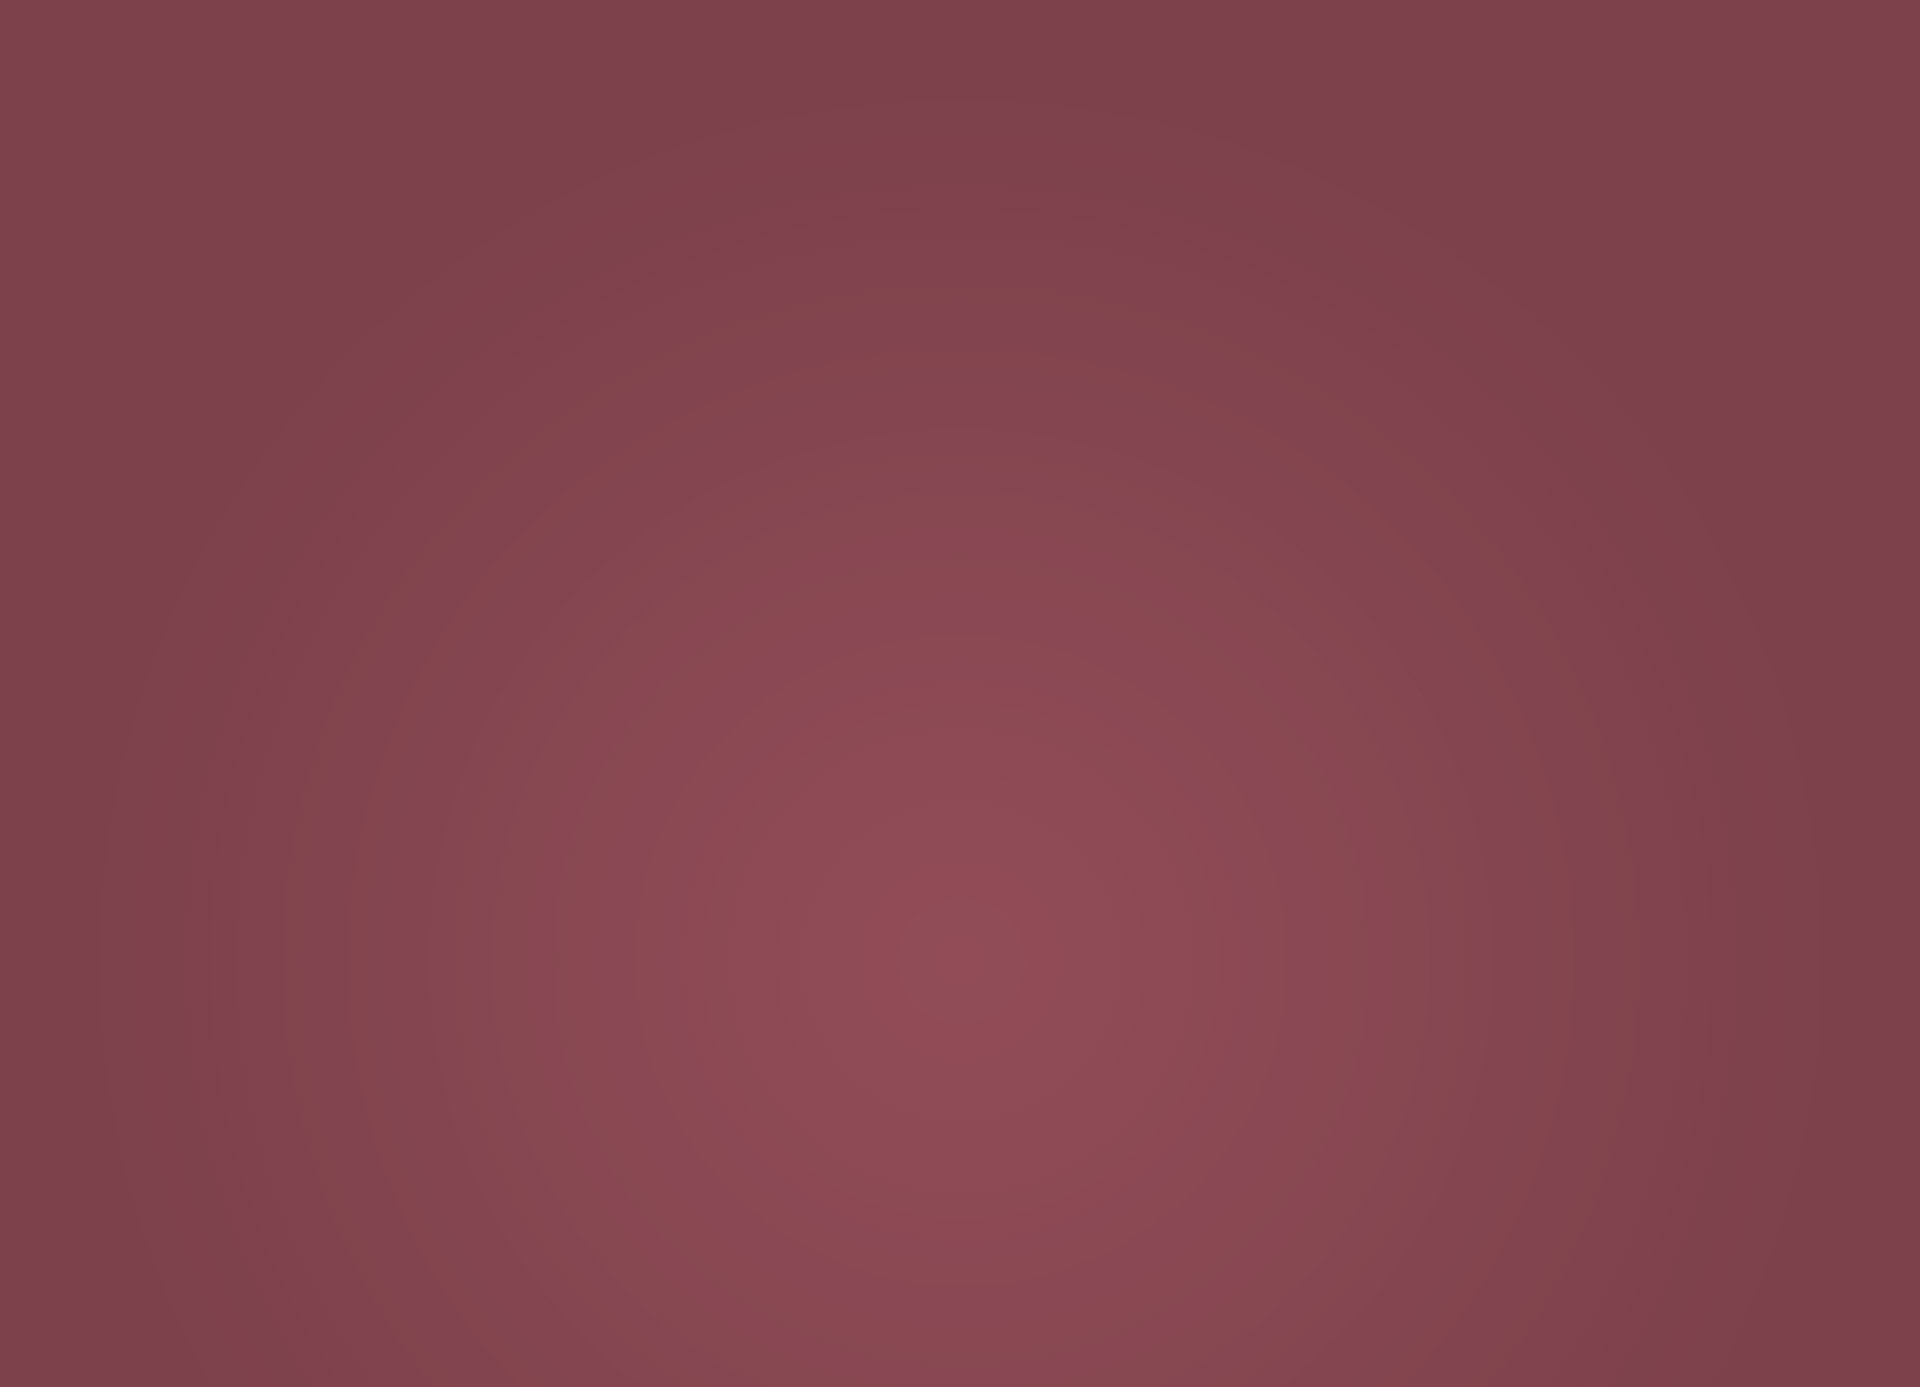 Indian Red, 1800+ Wall Paint Colors